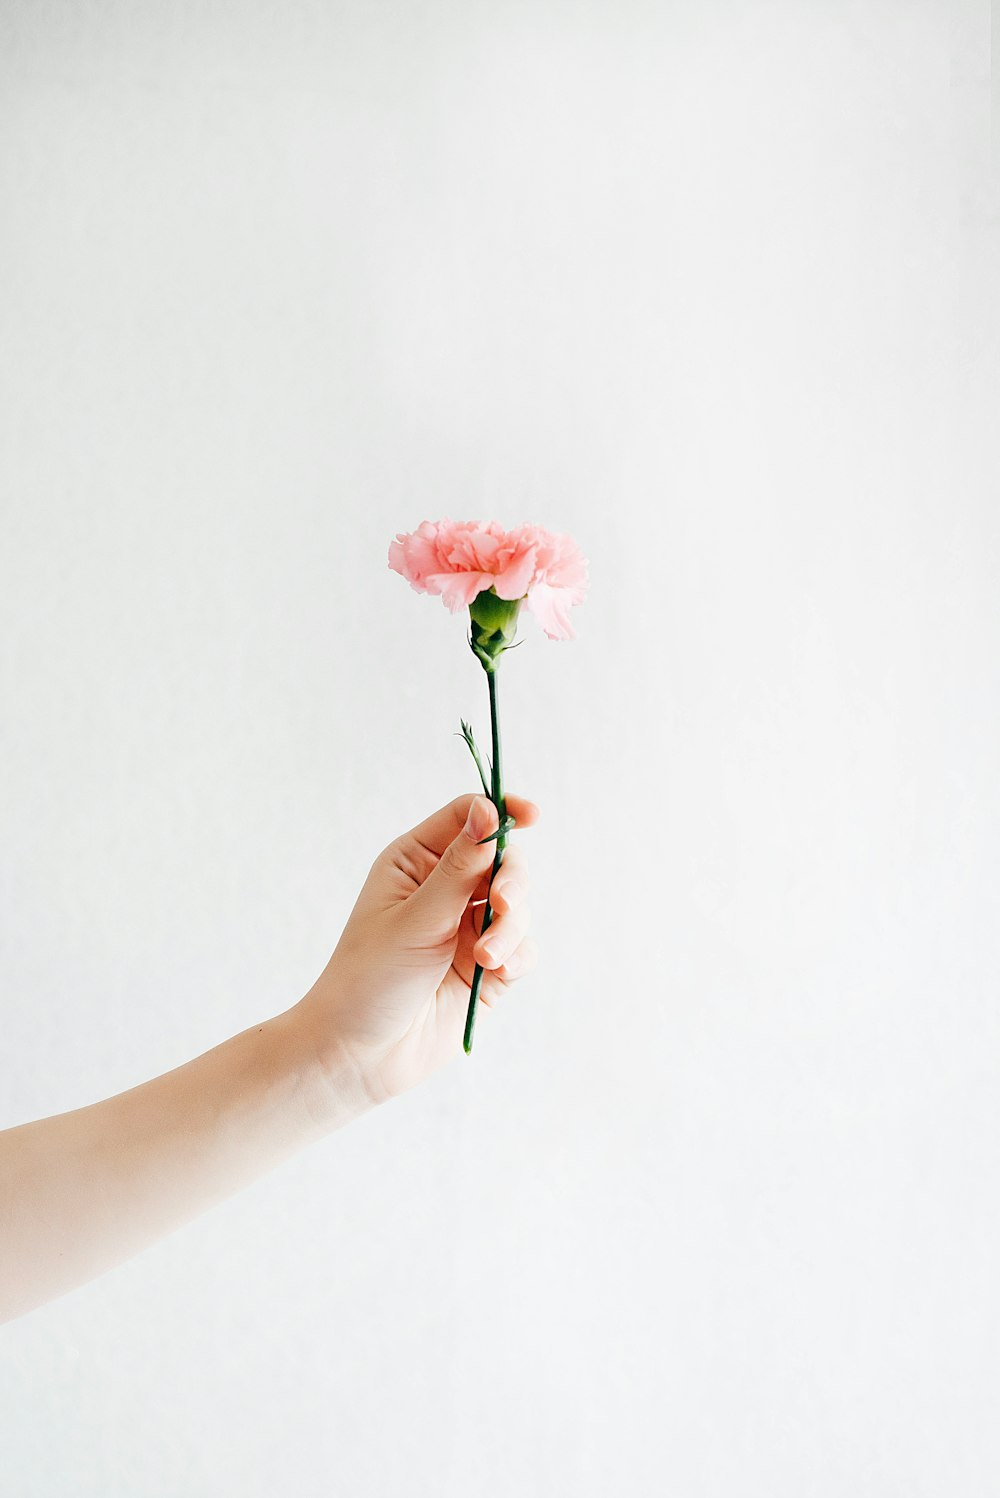 A person holding a flower up.